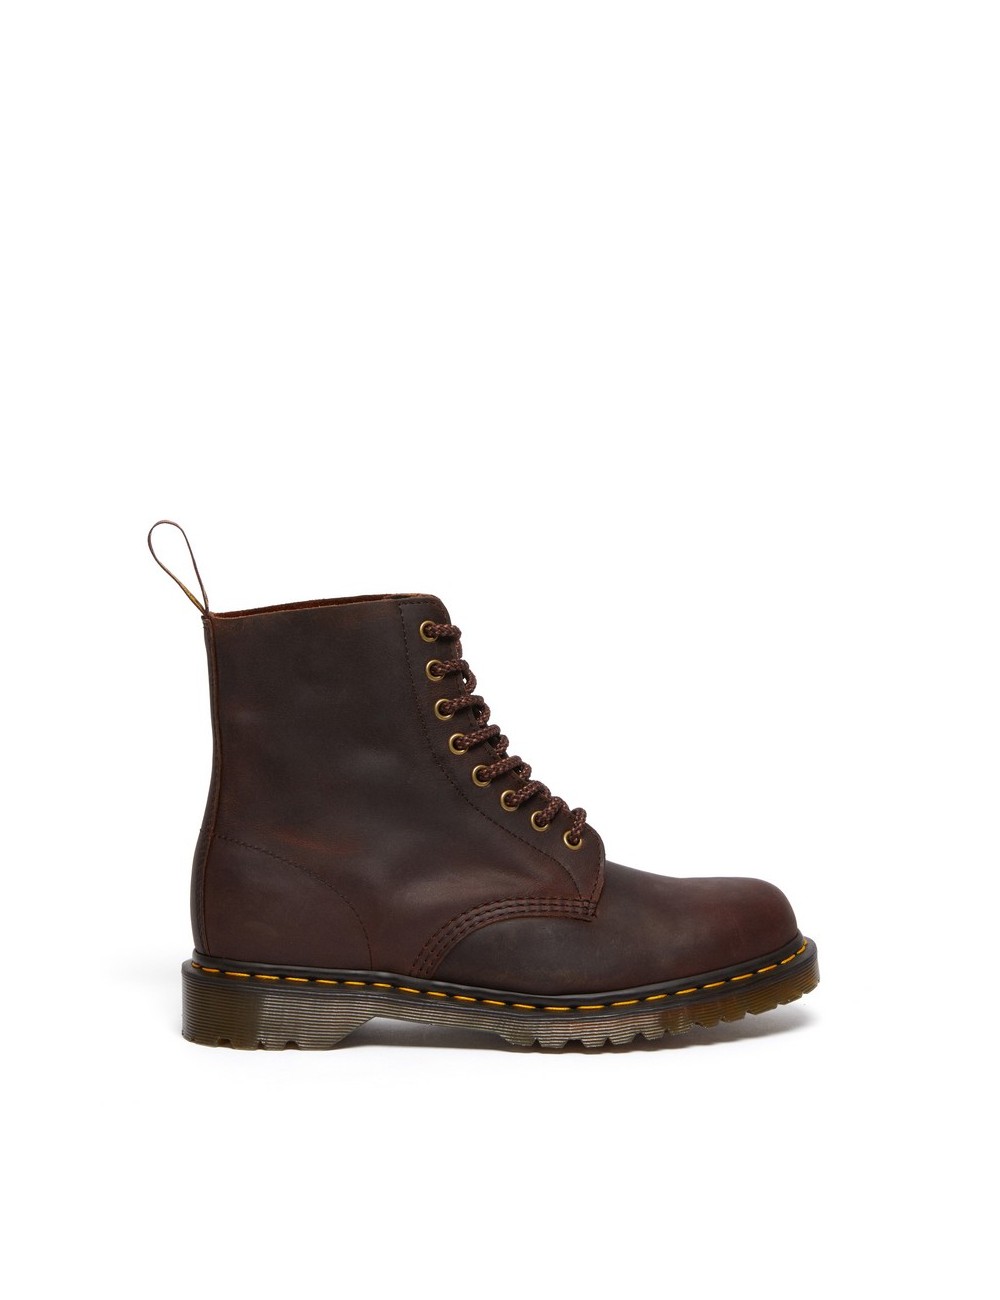 DR MARTENS 1460 PASCAL CHESTNUT BROWN WAXED FULL GRAIN BOOTS